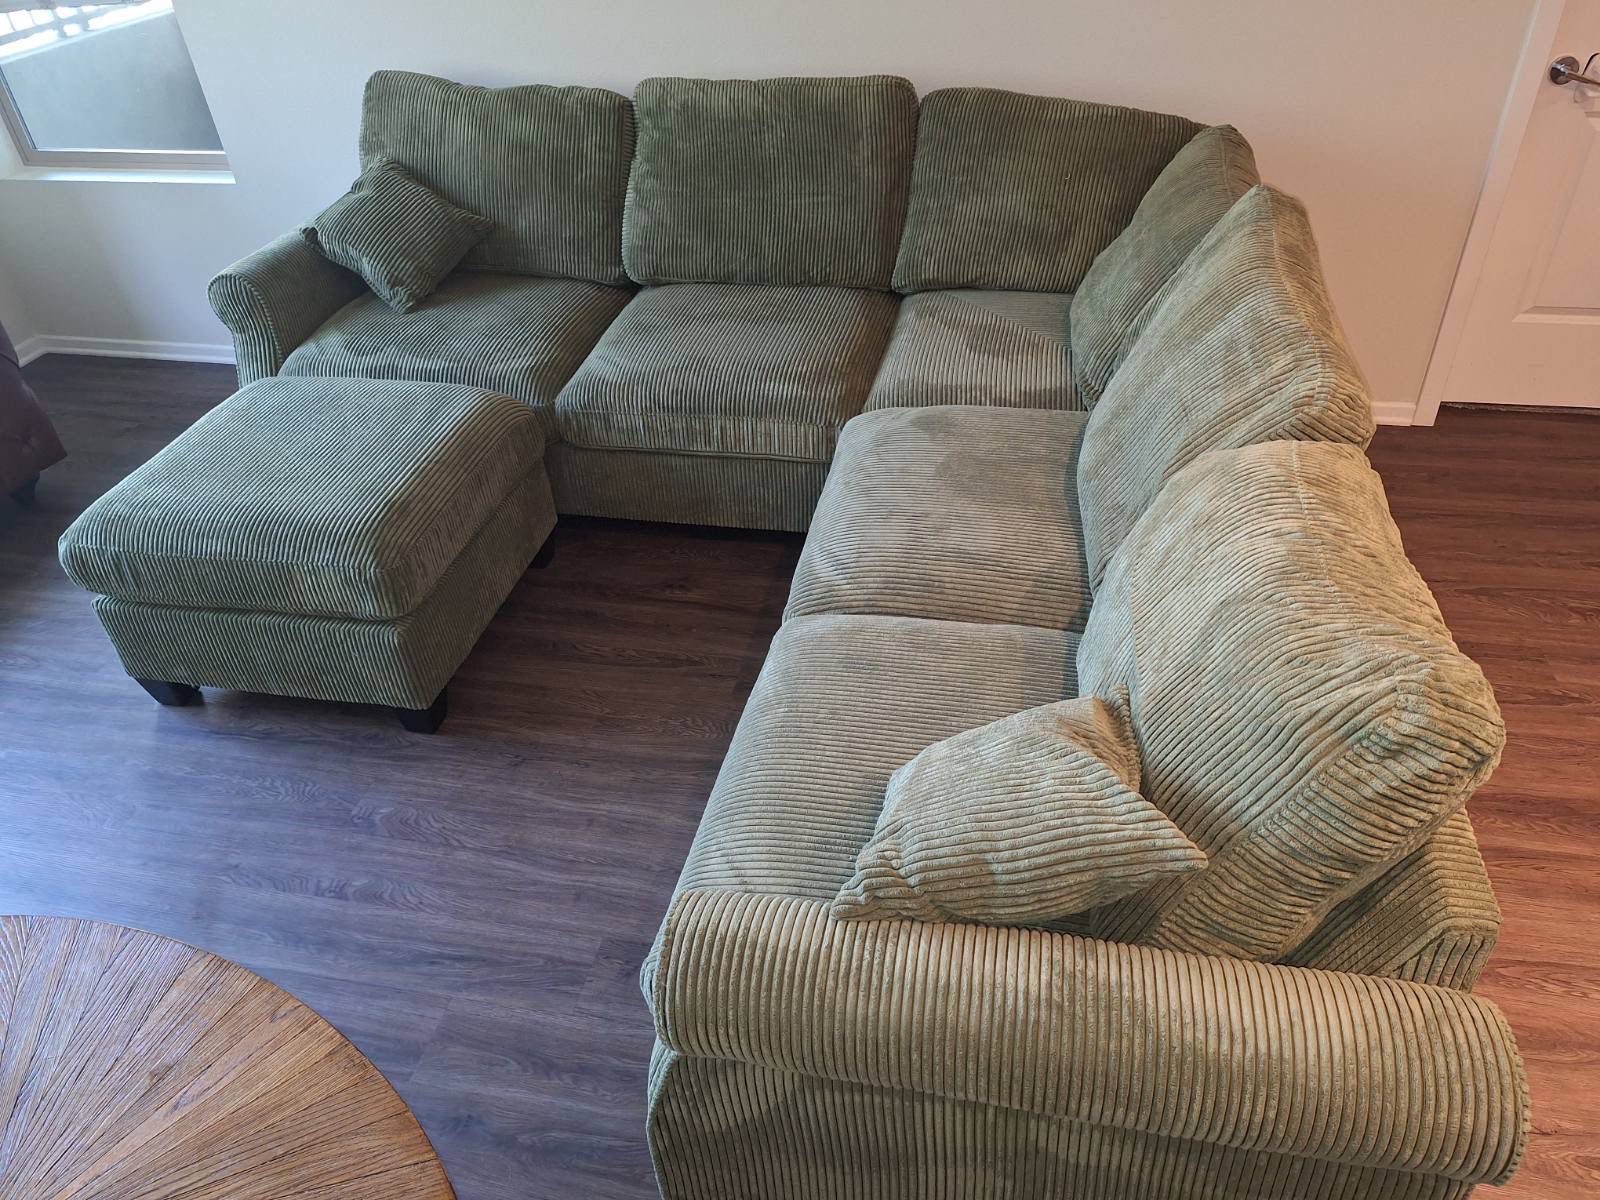 New 99x99 Sage Corduroy Sectional Couch / Free Delivery 